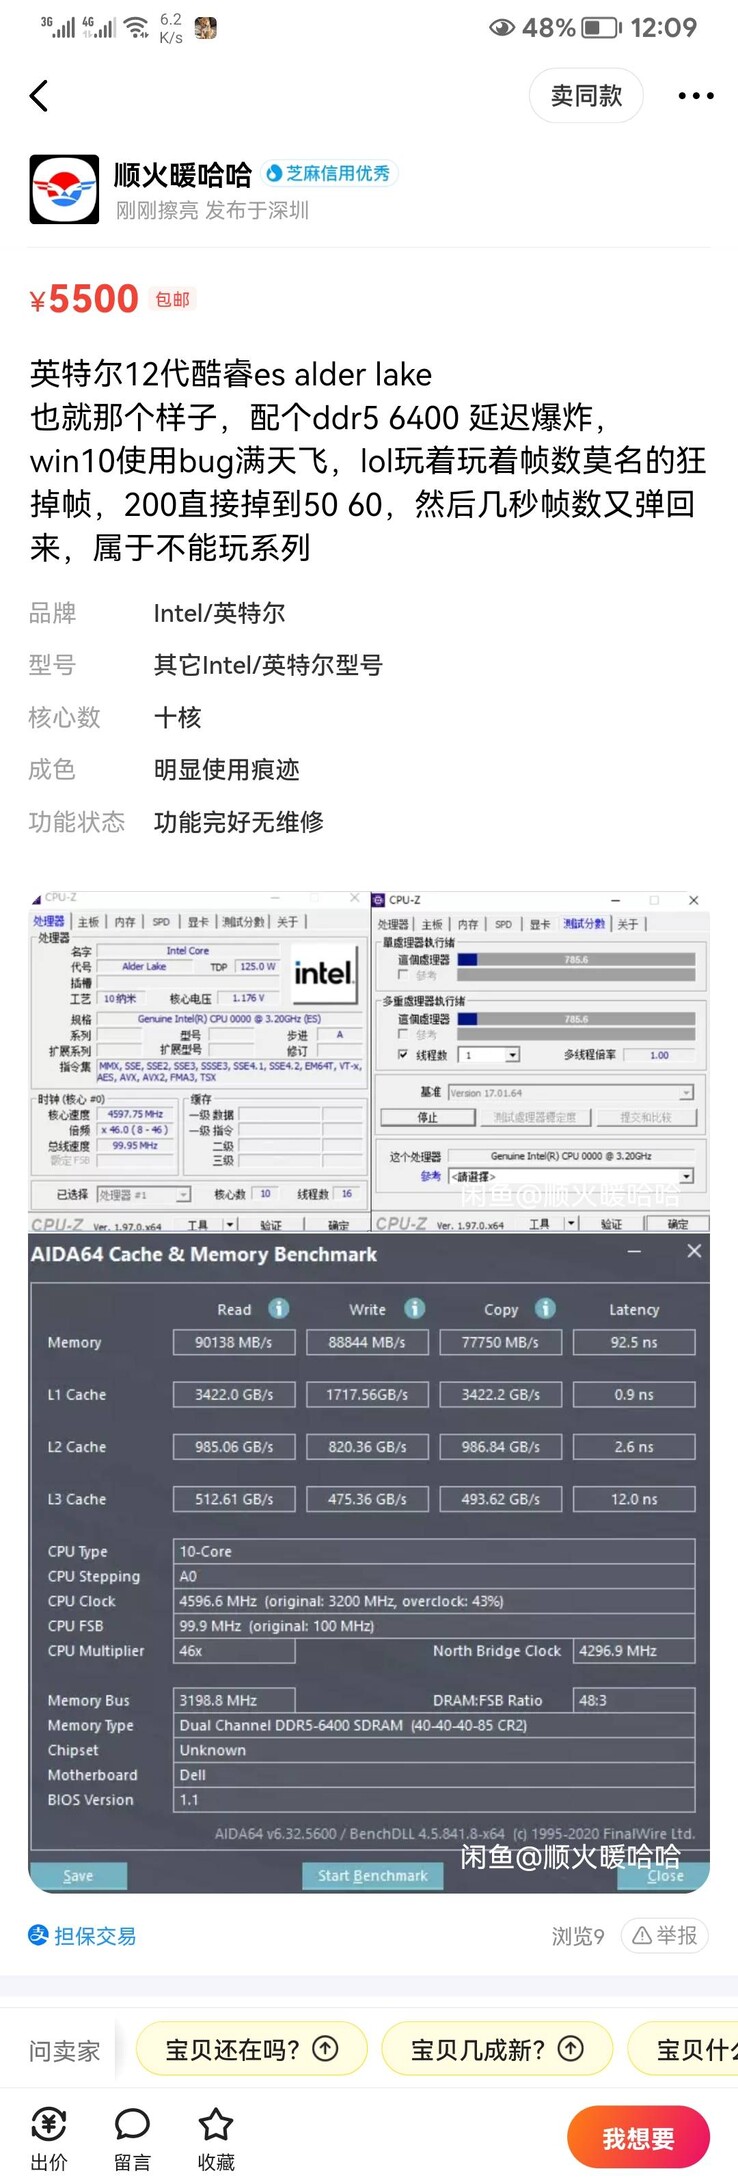 Chinese forum DDR5 memory sale listing (Image Source: nas32967961 on Twitter)